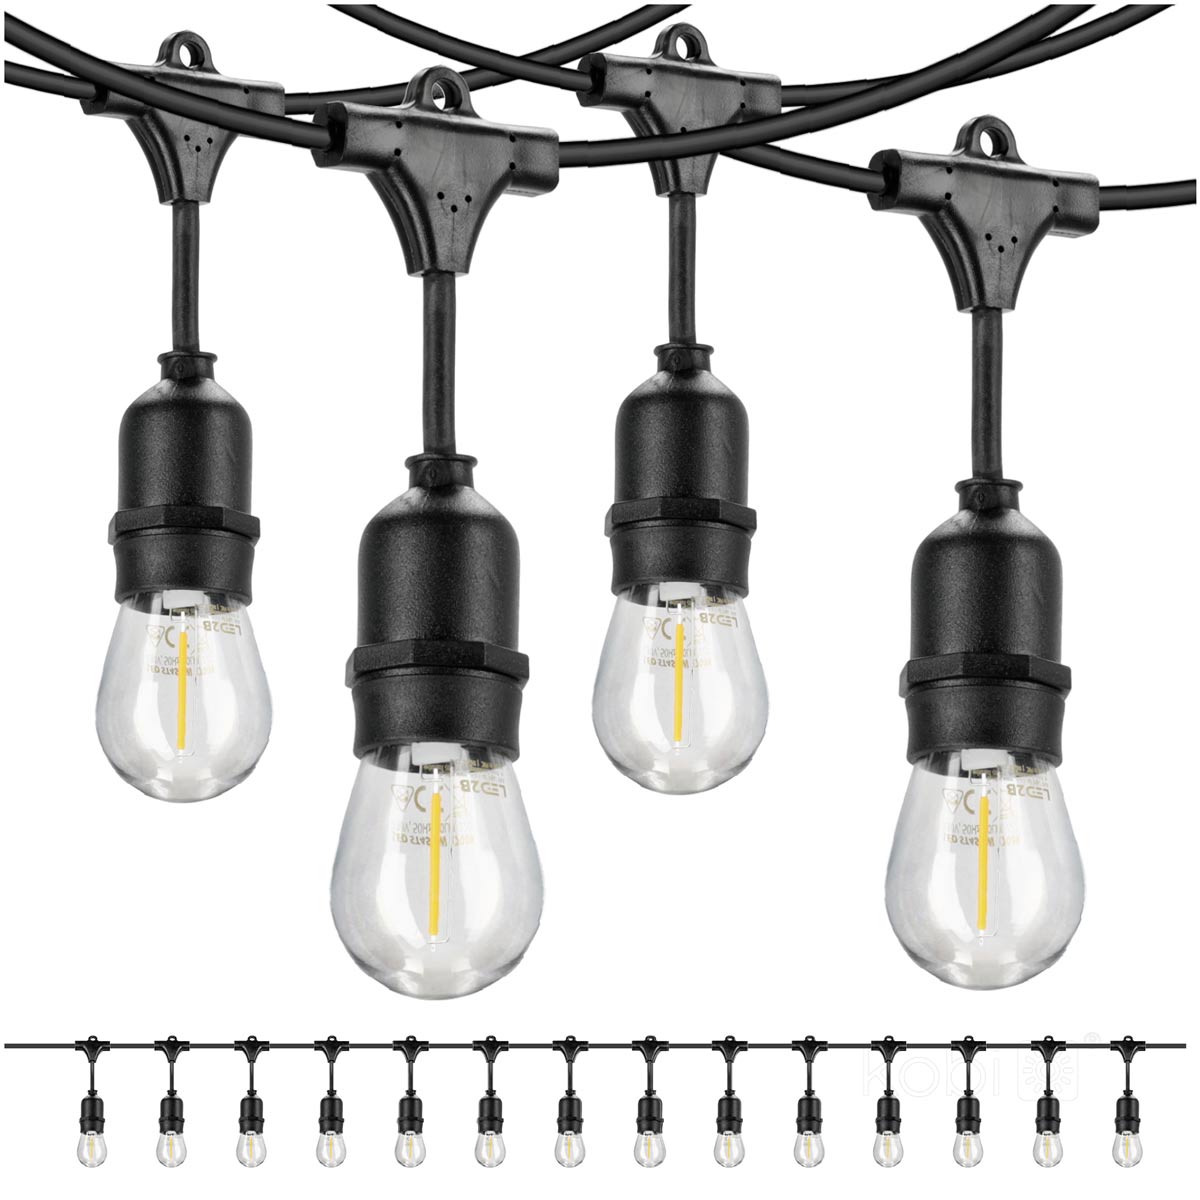 Light chain set MIMOSA2 20m & 20pcs 1W 2700K E27 LED-bulb, IP44 suitable for outdoor use